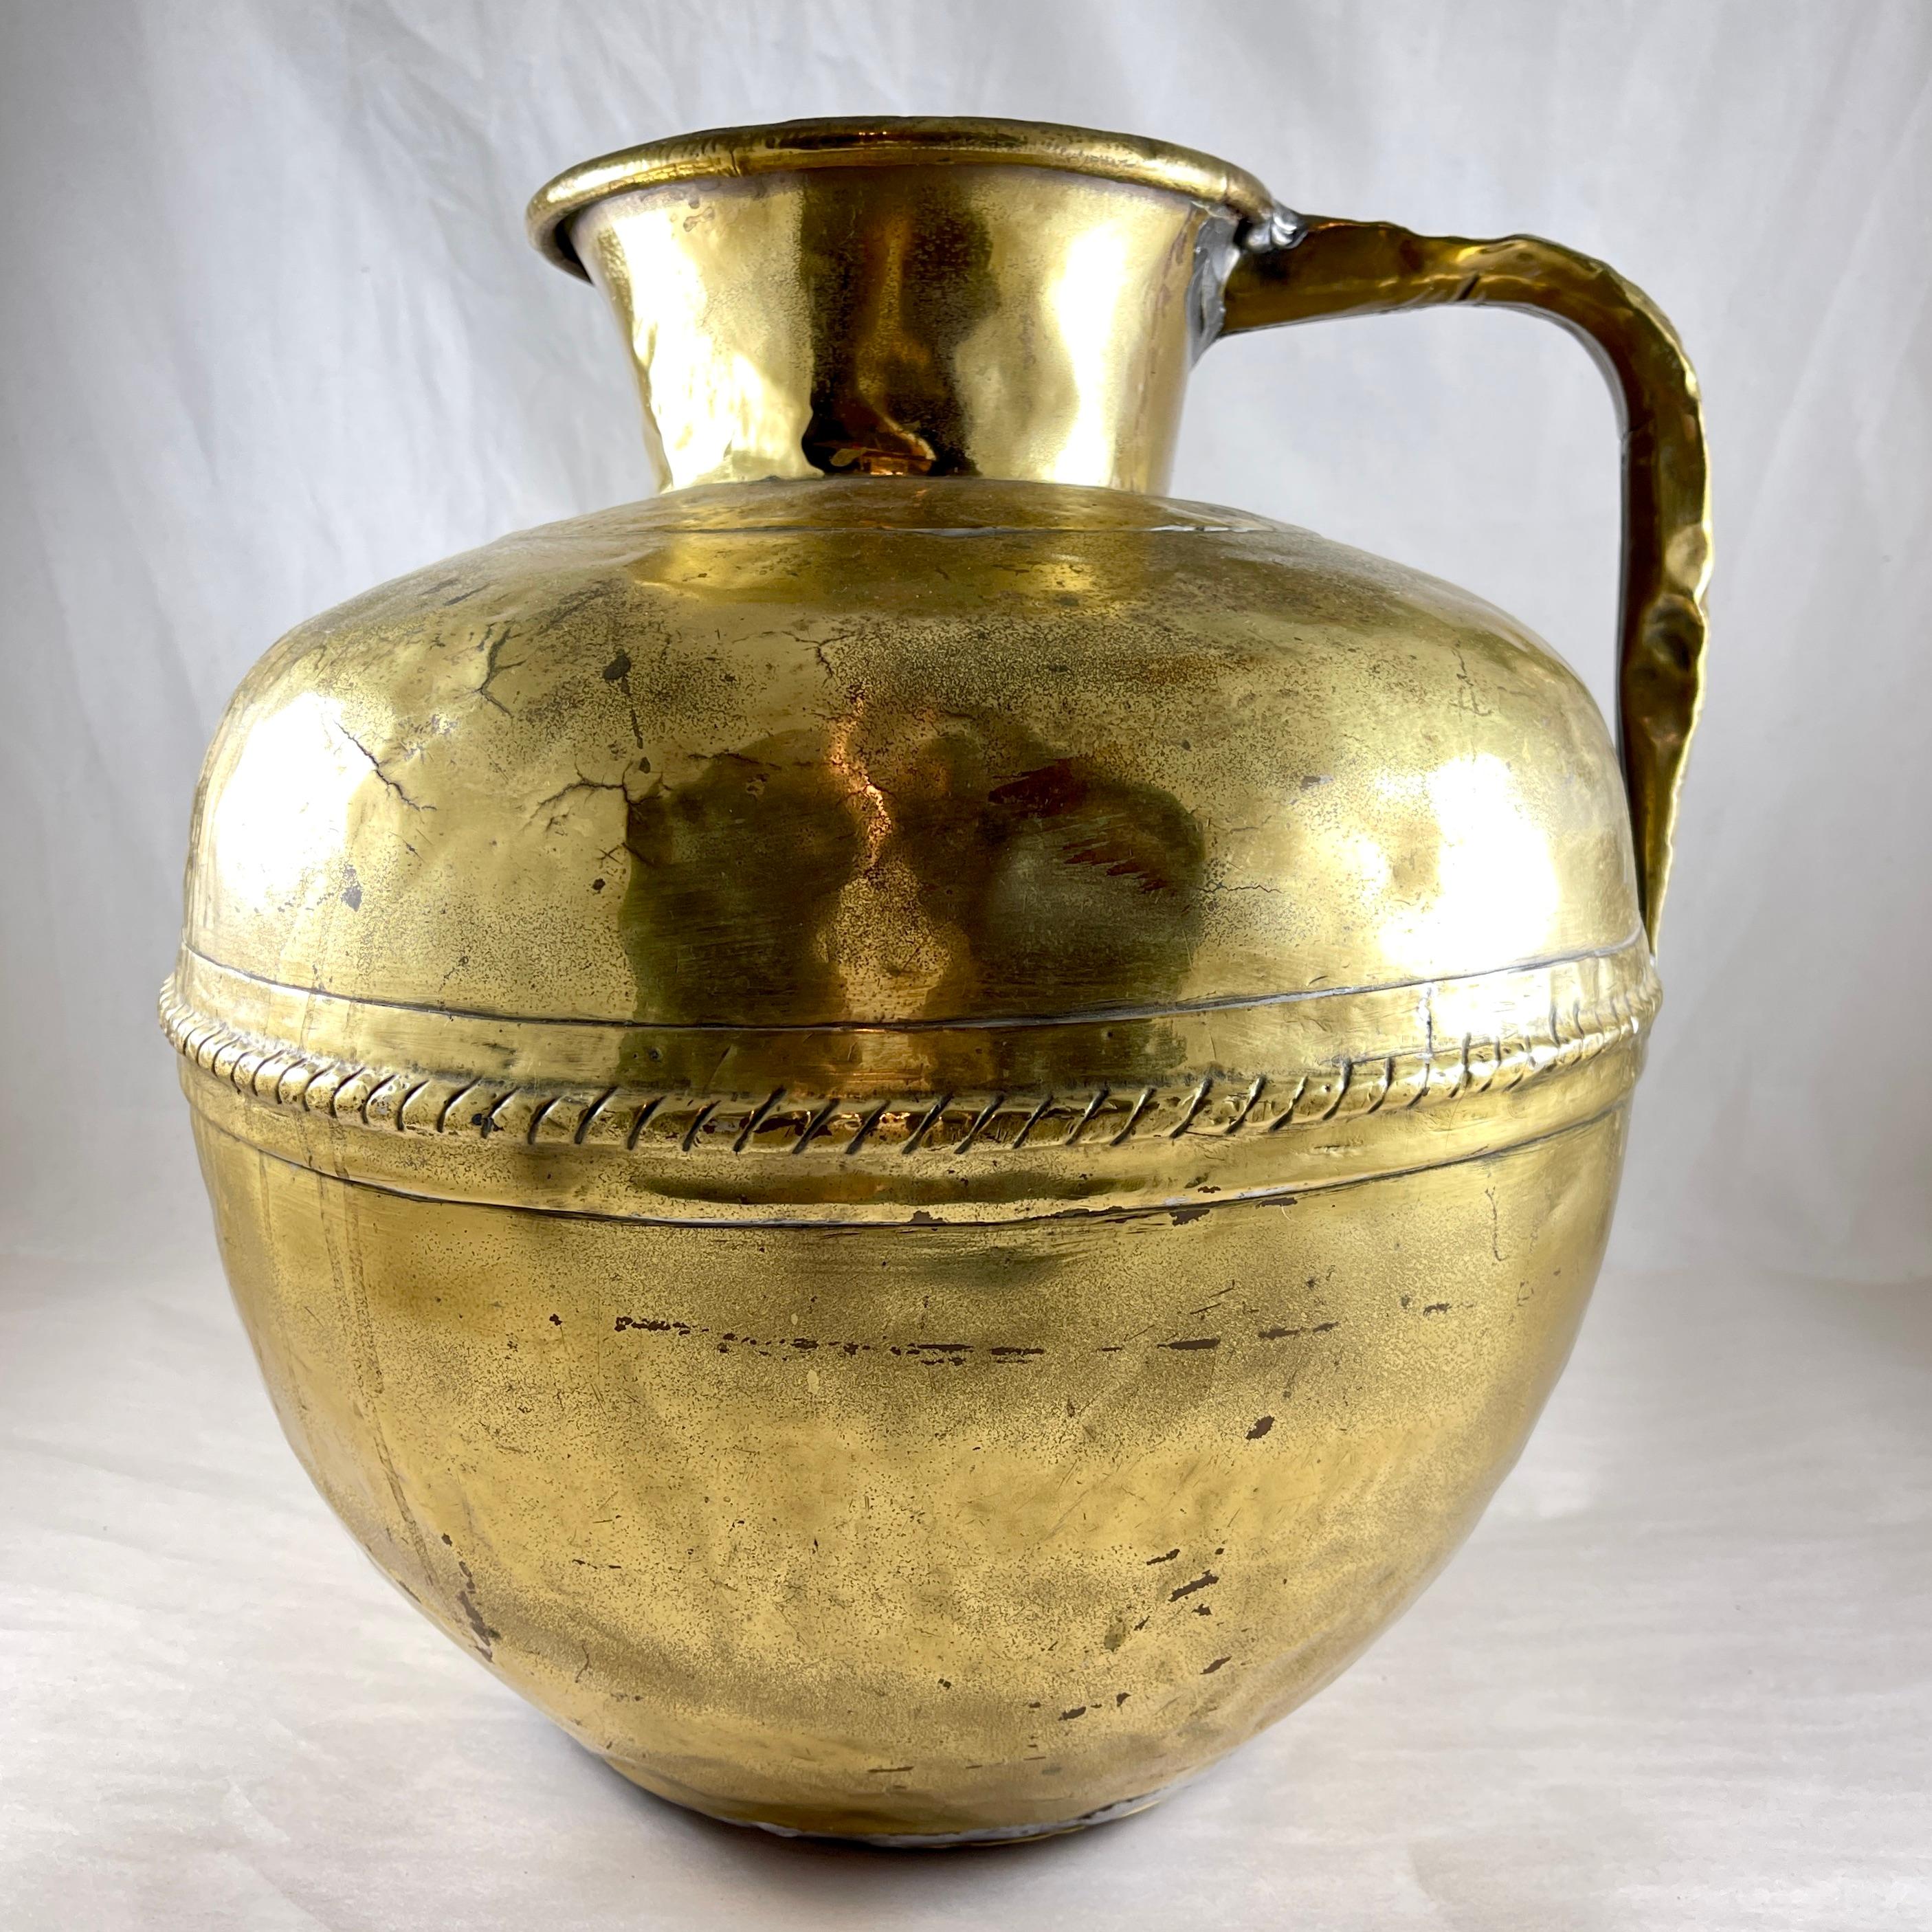 
A rustic hand hammered Brass Milk Jug from Normandy, France, Circa 1850

A large piece of hand made brass used to transport milk from the country dairy to the home, often by donkey. 

The outer body shows the textured surface left by the hammering